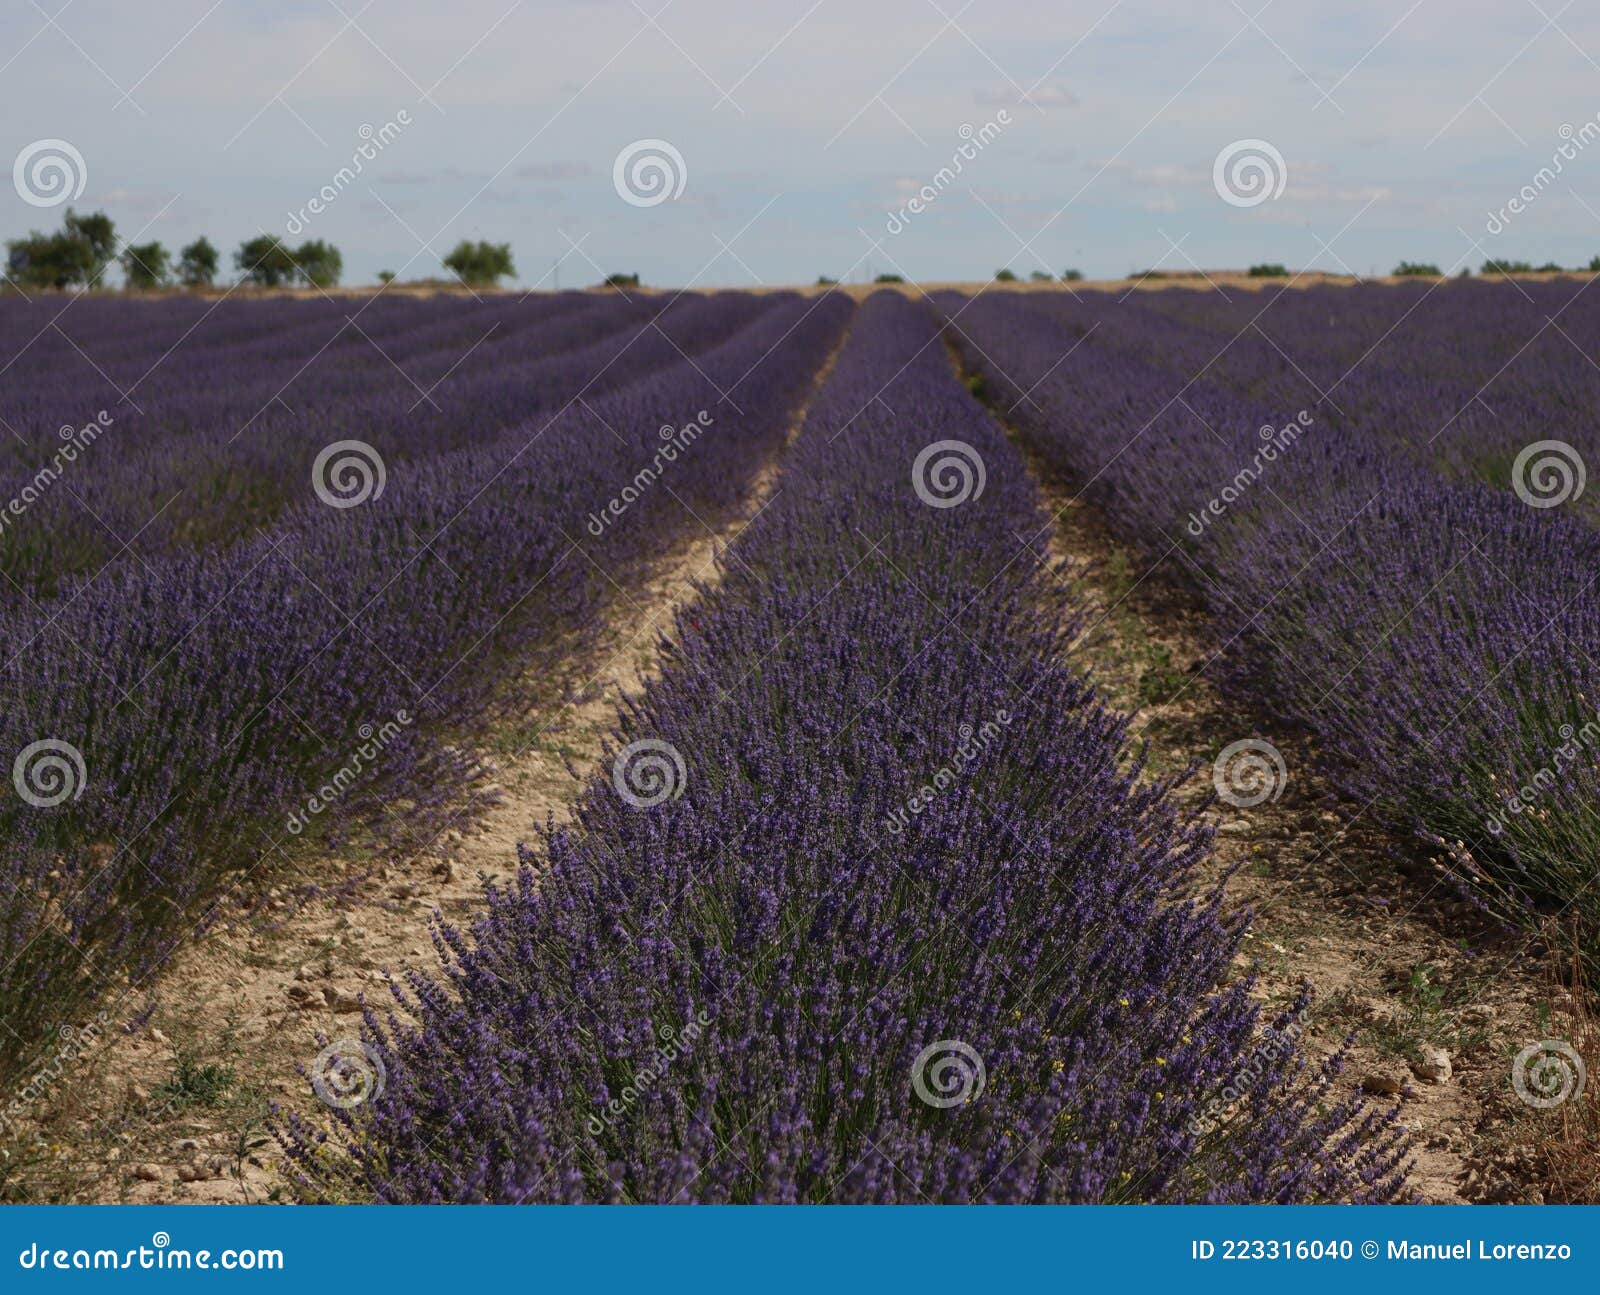 beautiful field lavender flowers aroma natural color insect oils